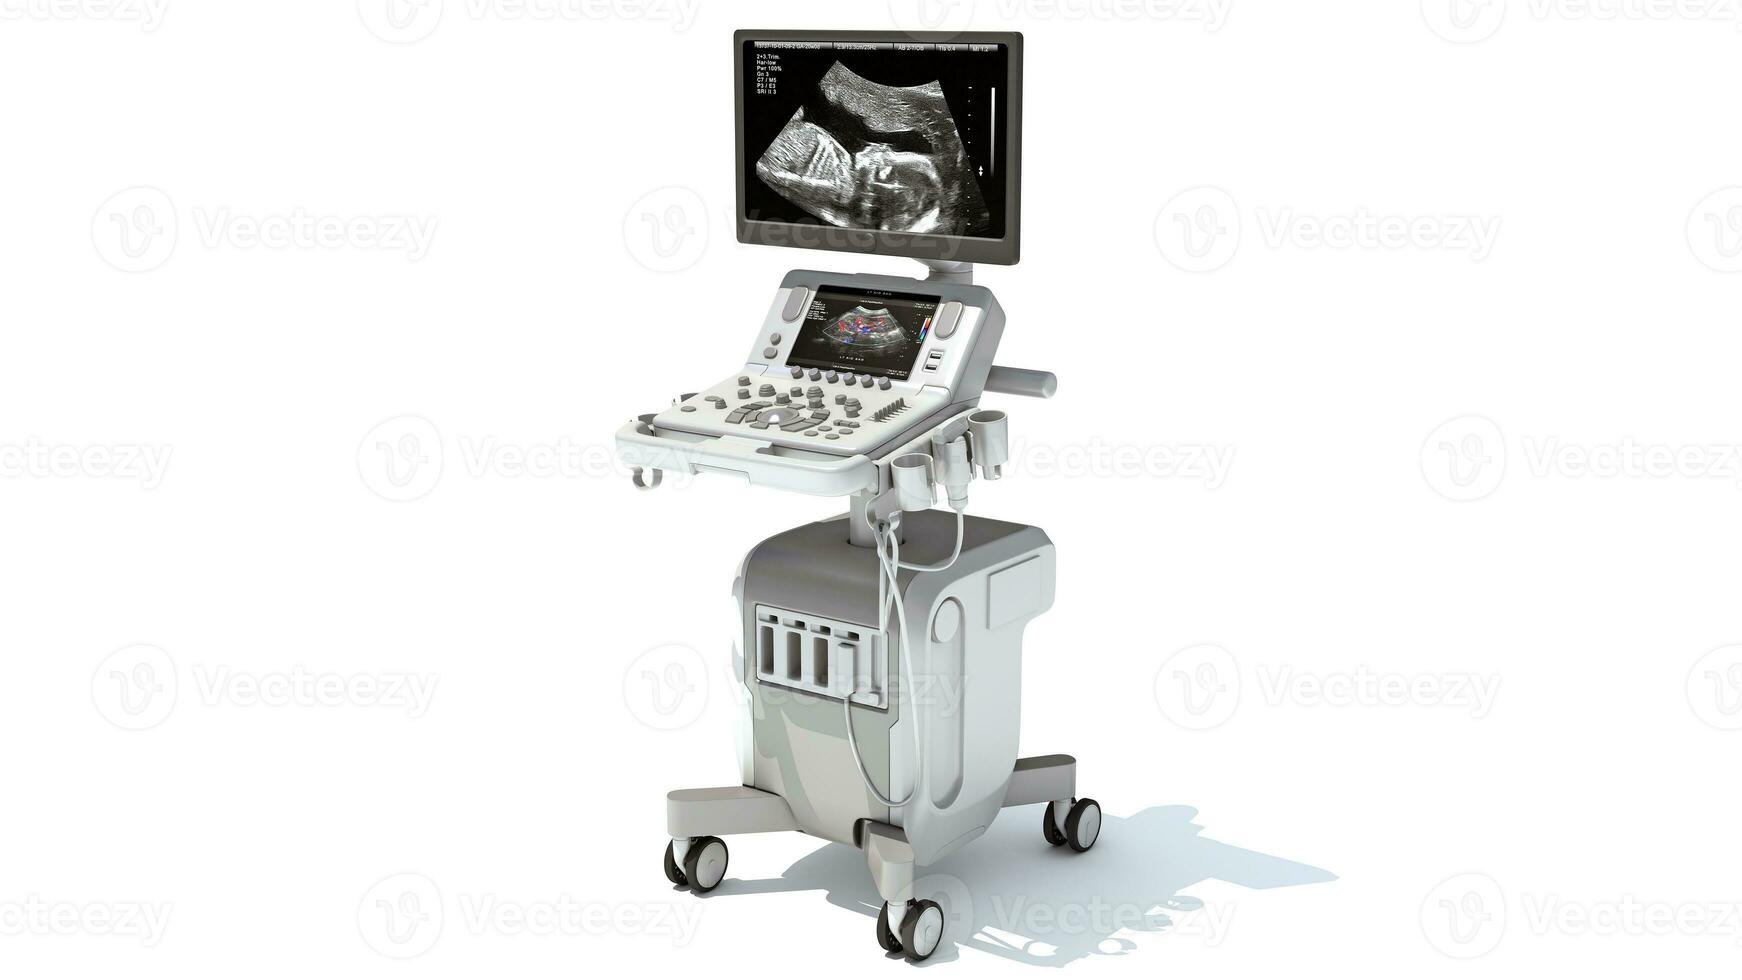 Anesthesia Respiratory Workstation Trolley medical equipment 3D rendering on white background photo